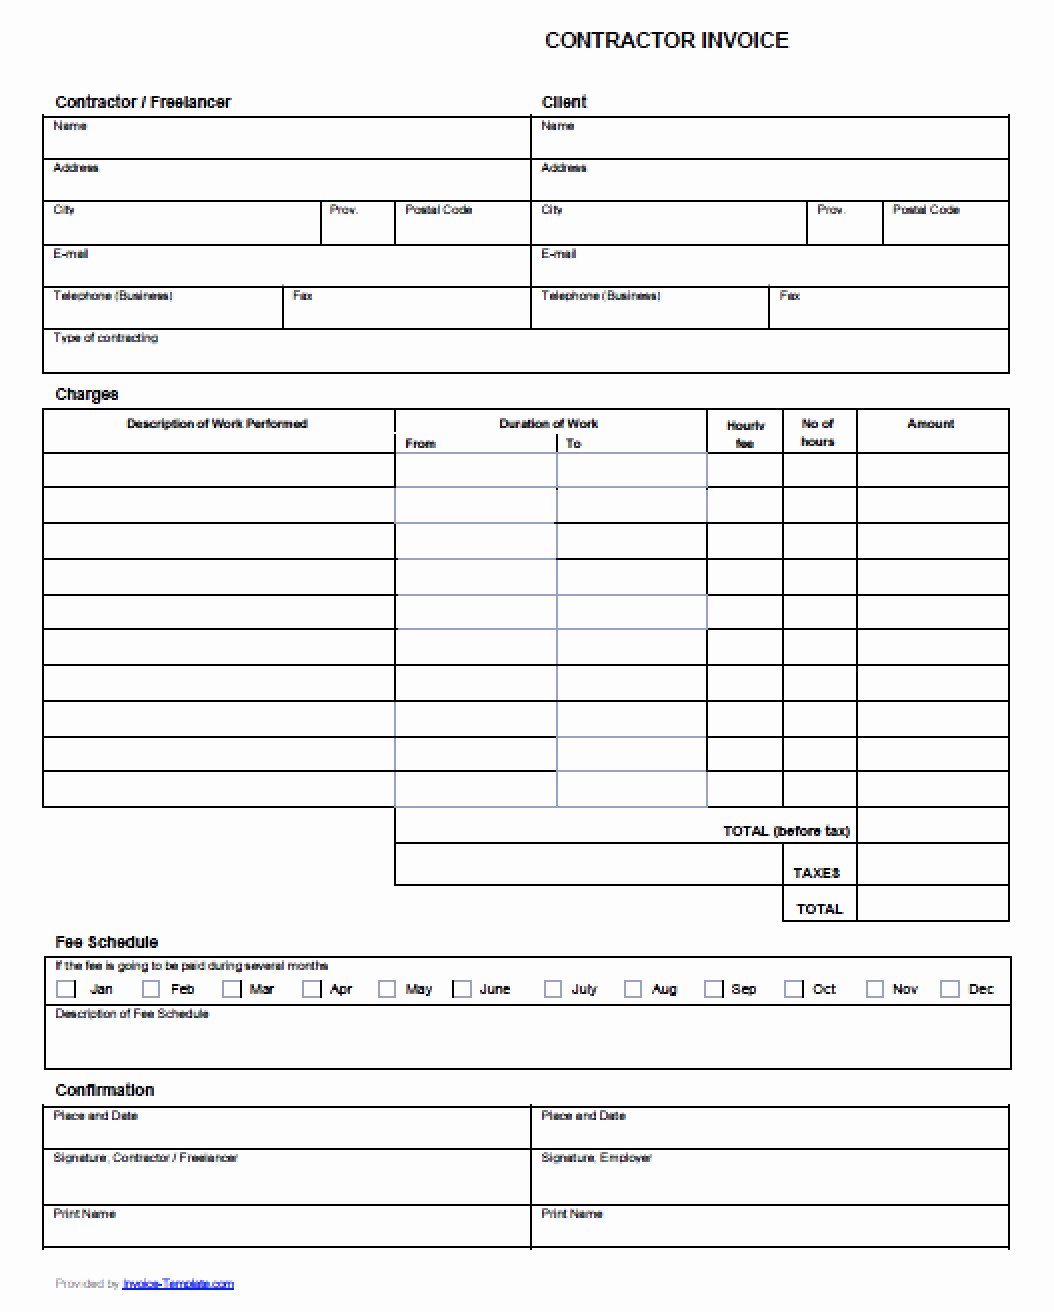 Independent Contractor Invoice Template Excel New Independent Contractor Invoice Template Excel – Bushveld Lab